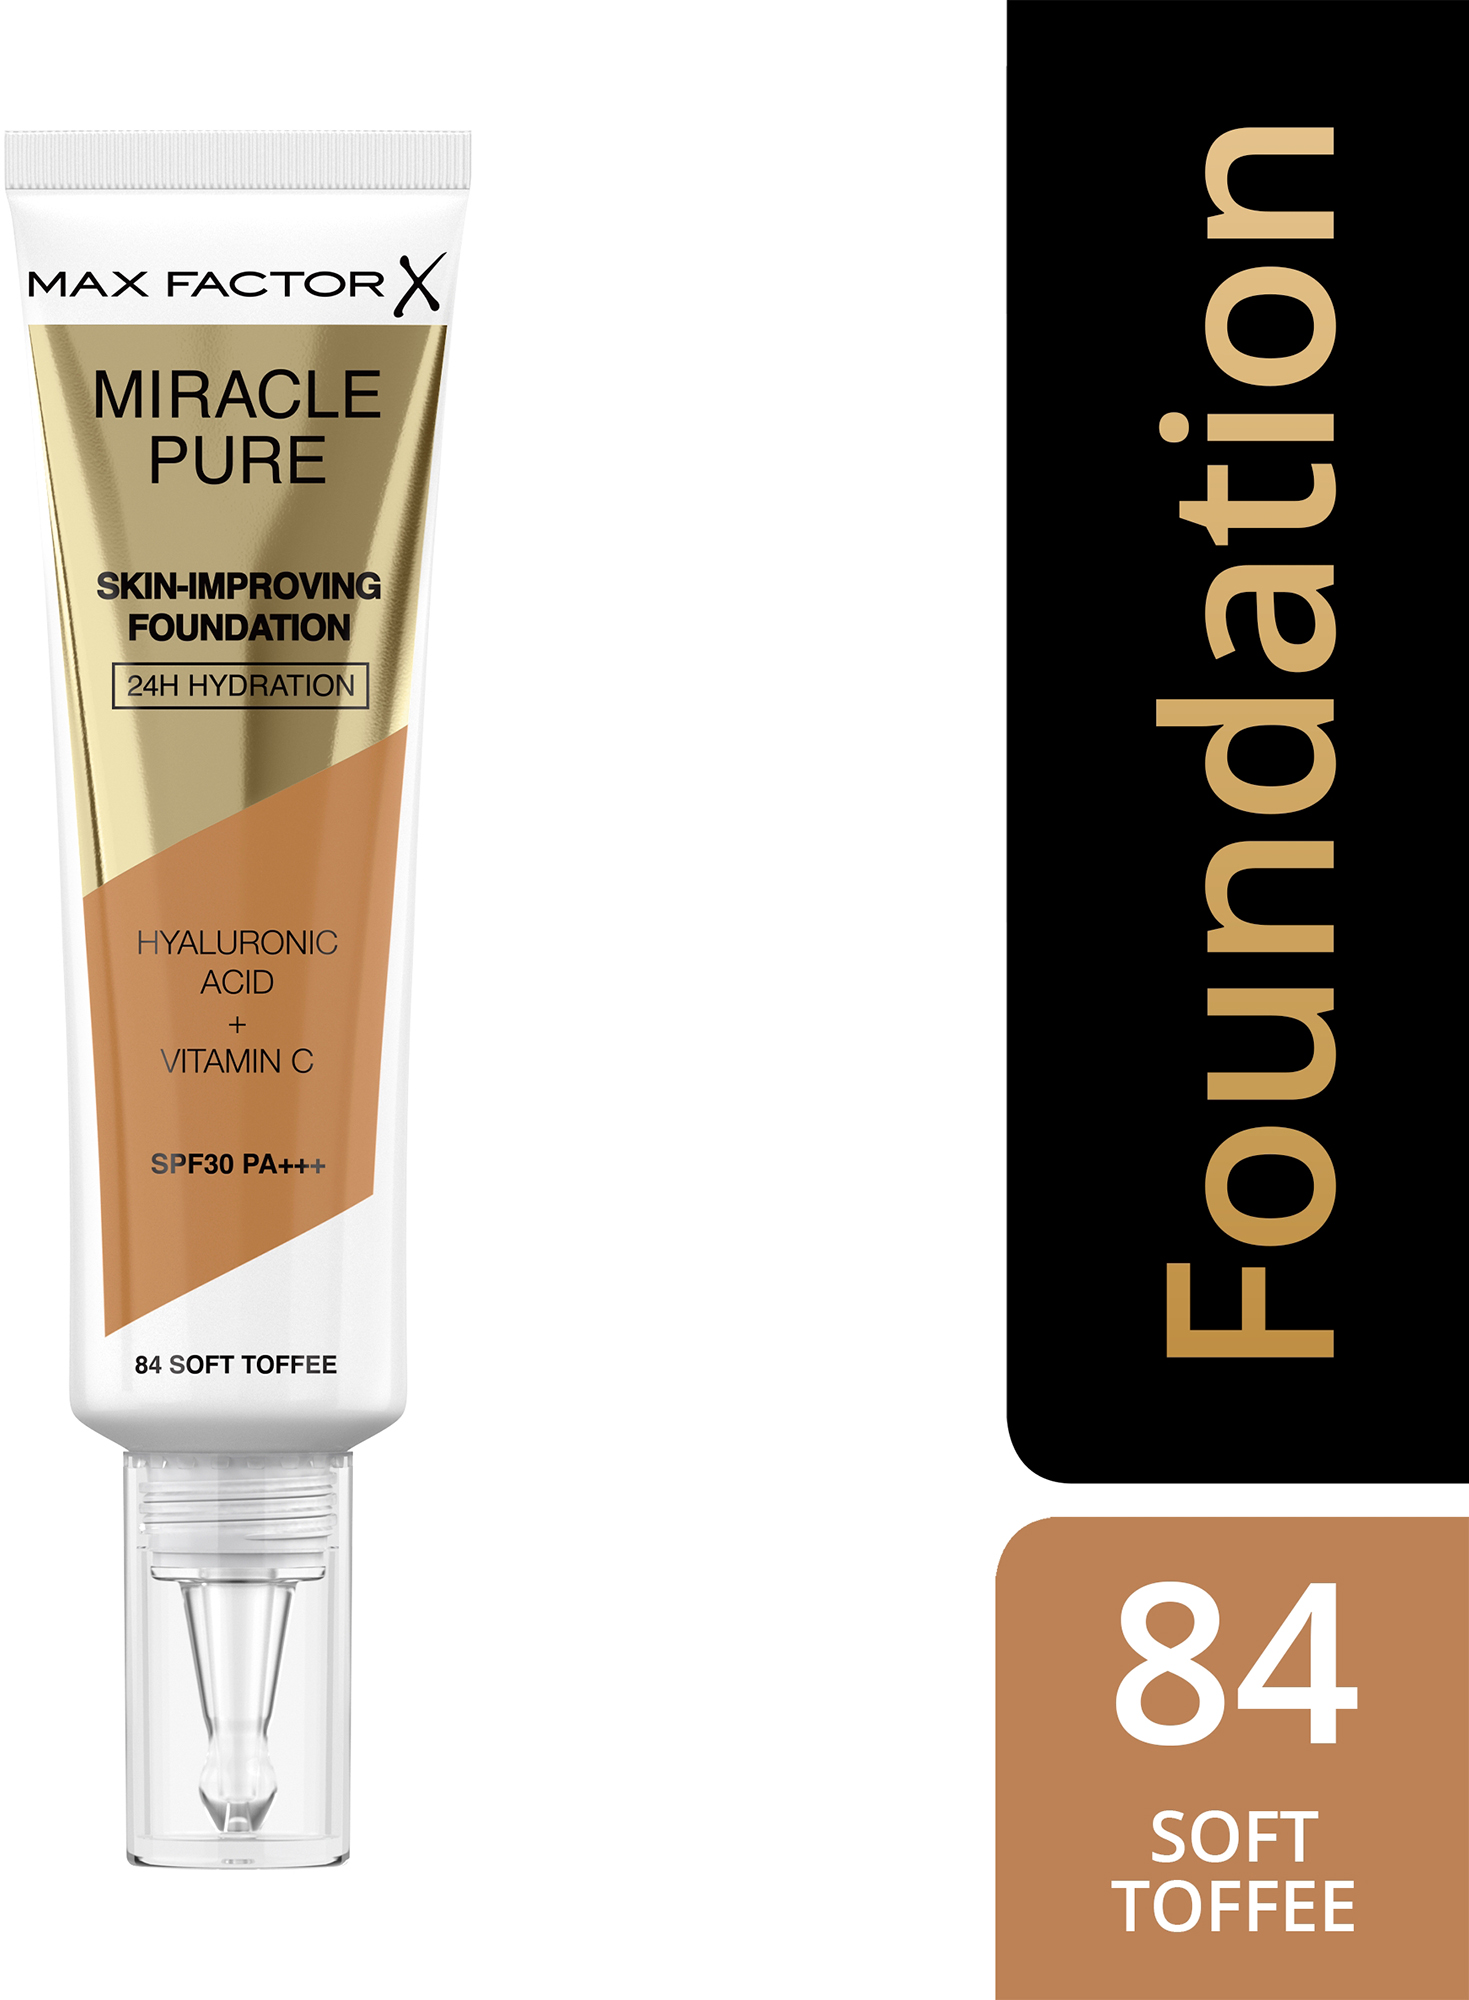 Miracle Pure Foundation 55 Factor Max Beige Skin-Improving